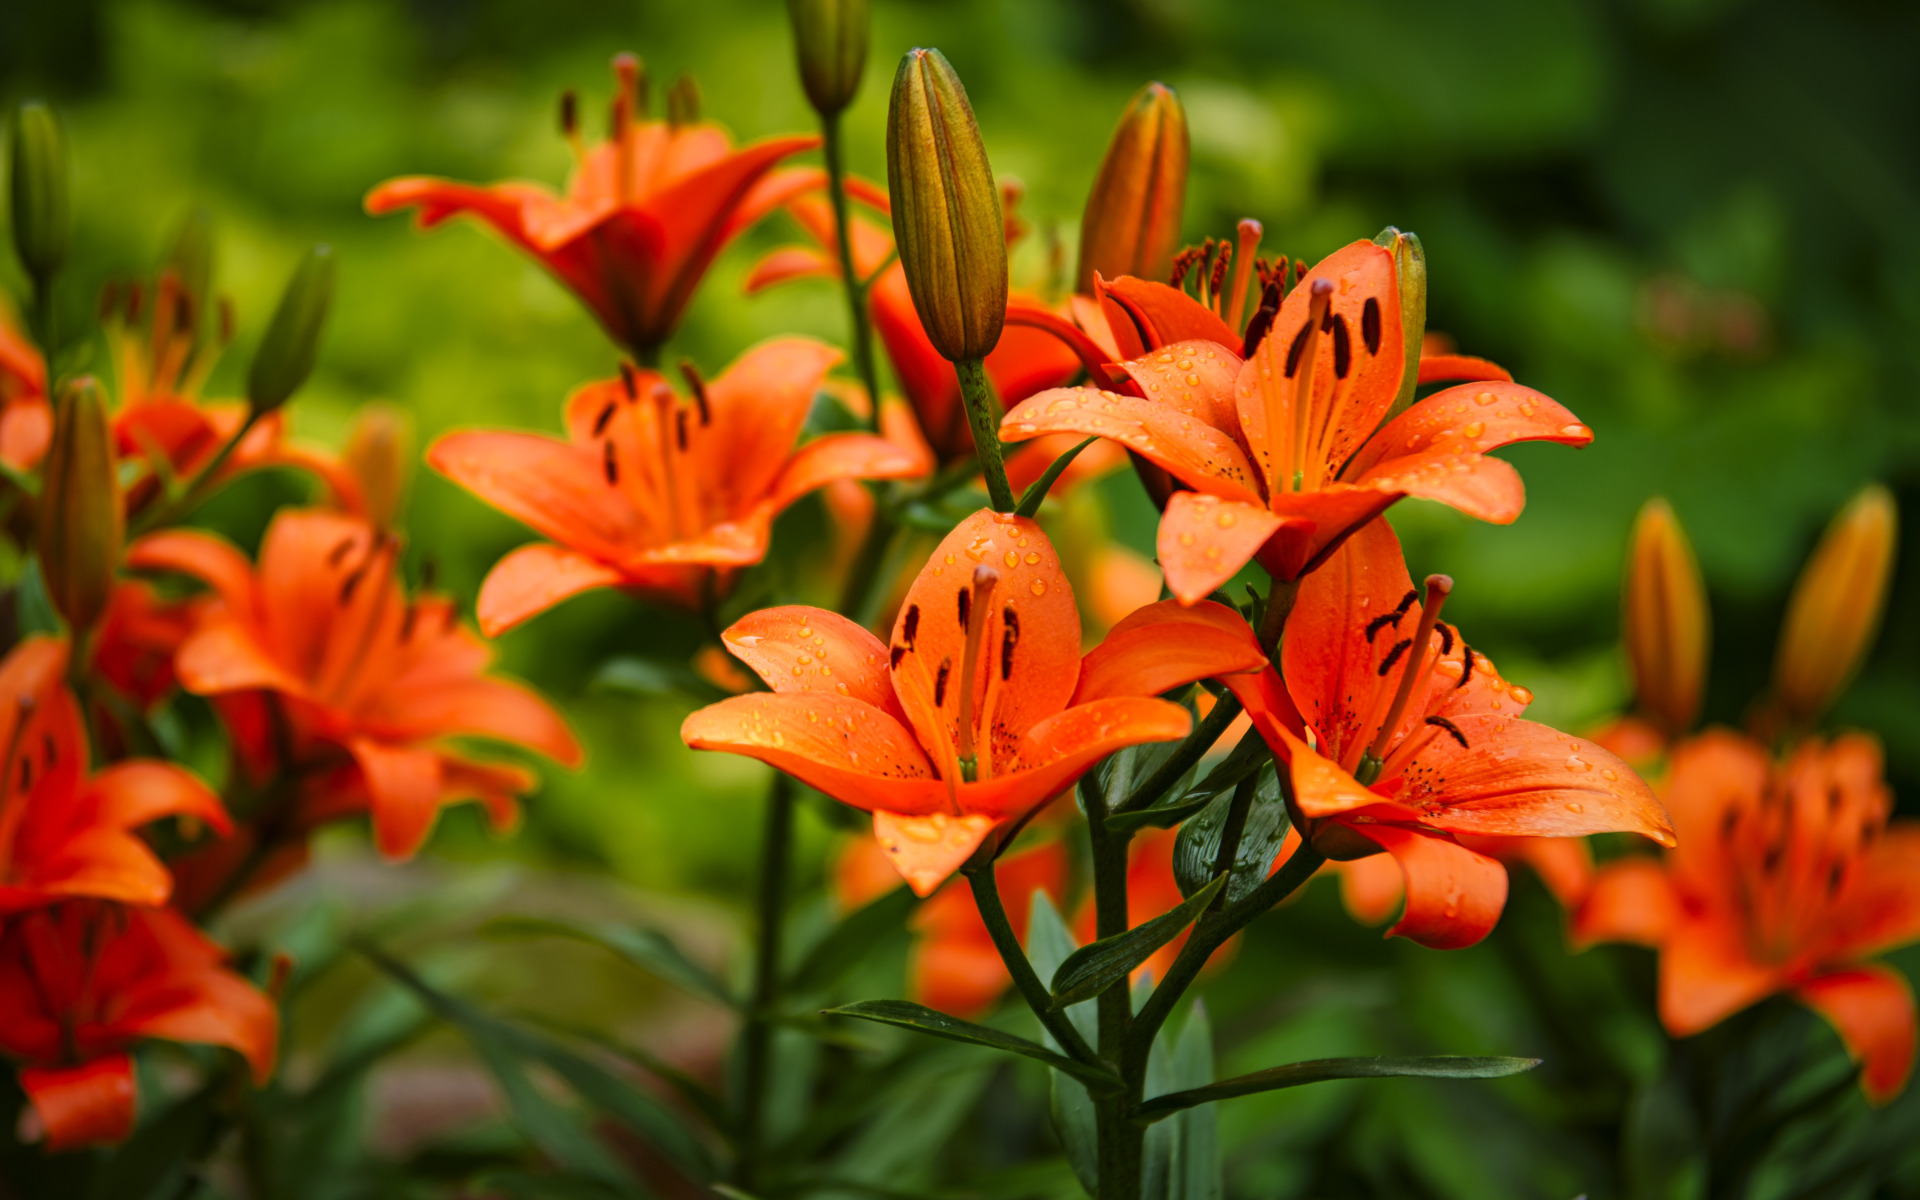 Lily flowers.